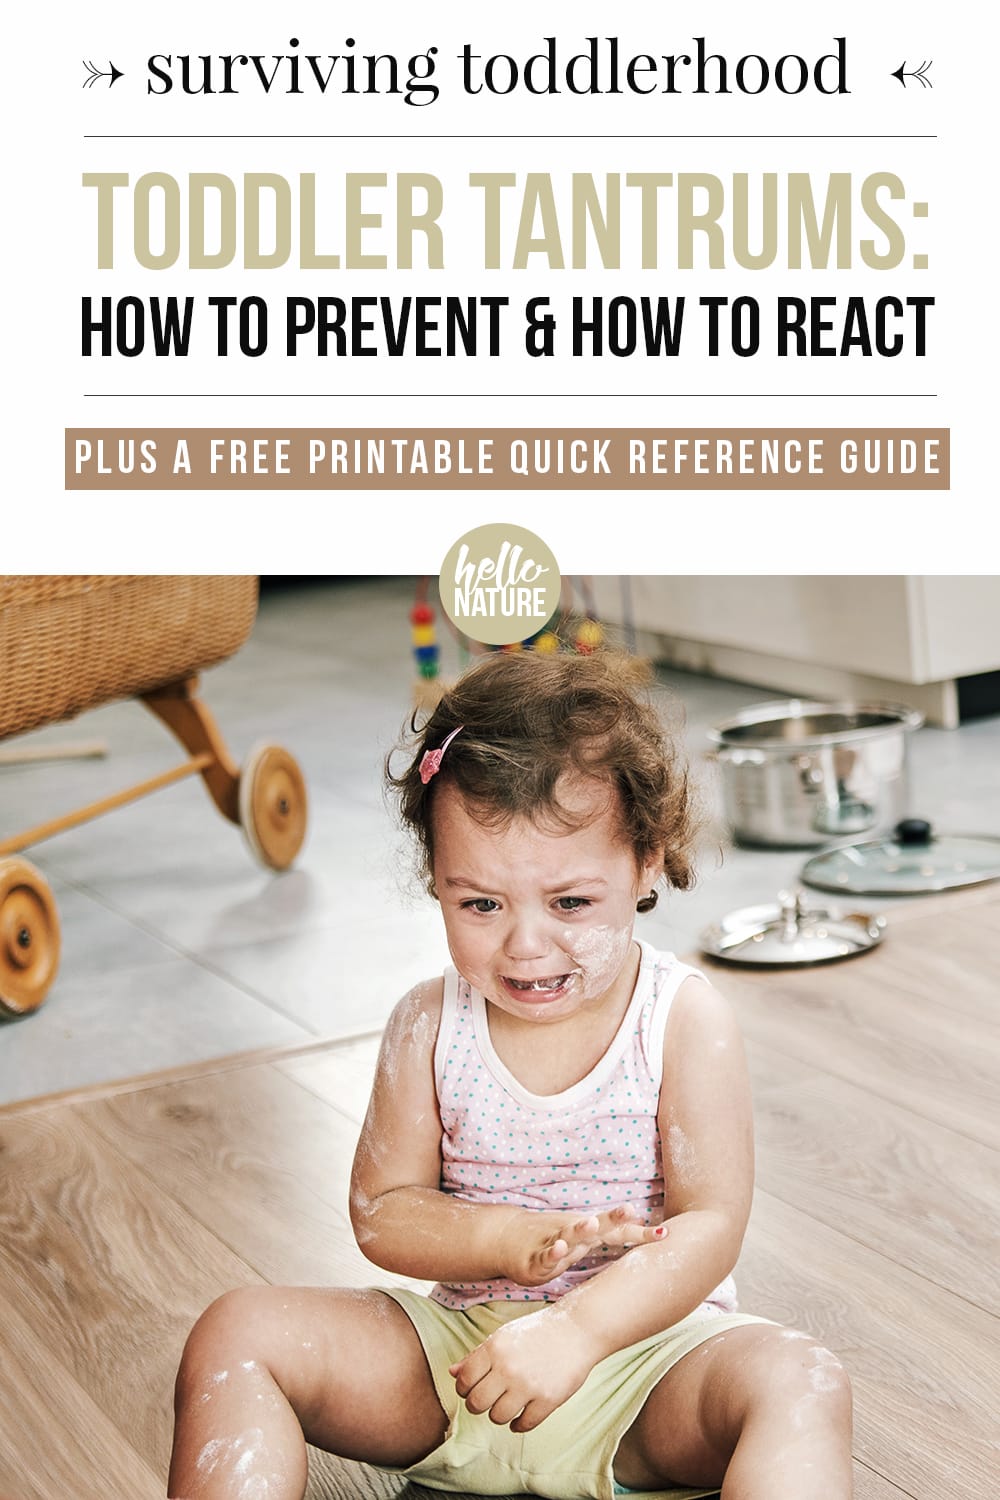 Wondering why toddlers throw temper tantrums? Or maybe you're desperately seeking how to deal with toddler temper tantrums? We've got you covered! You'll learn how to handle toddler tantrums like a pro with this post and the free quick reference printable we've included.